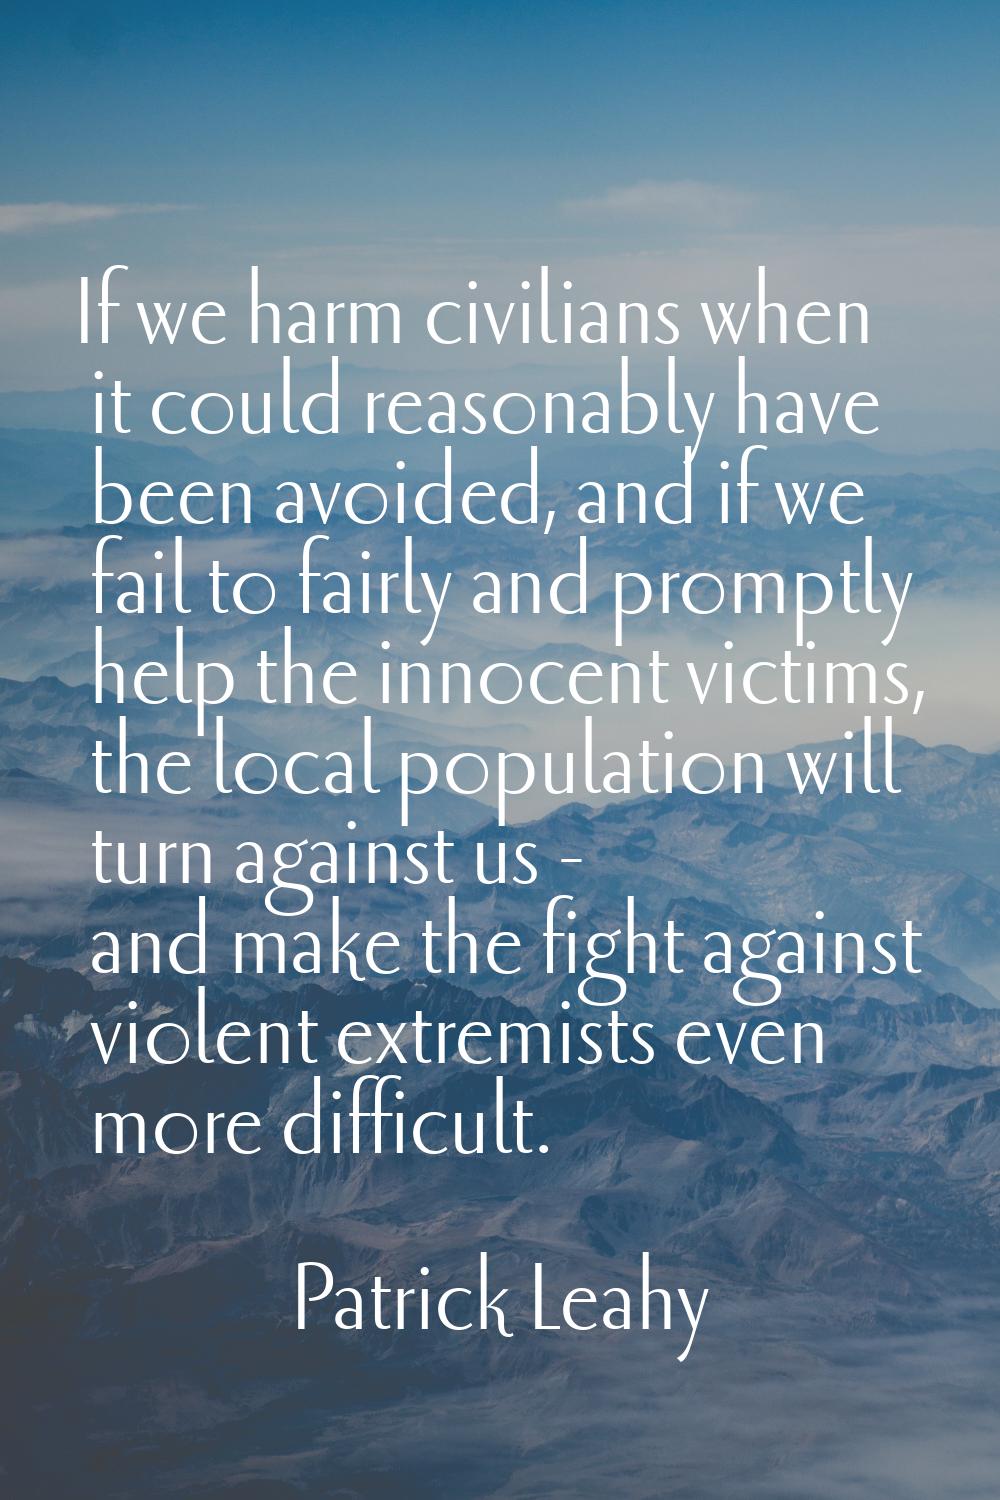 If we harm civilians when it could reasonably have been avoided, and if we fail to fairly and promp